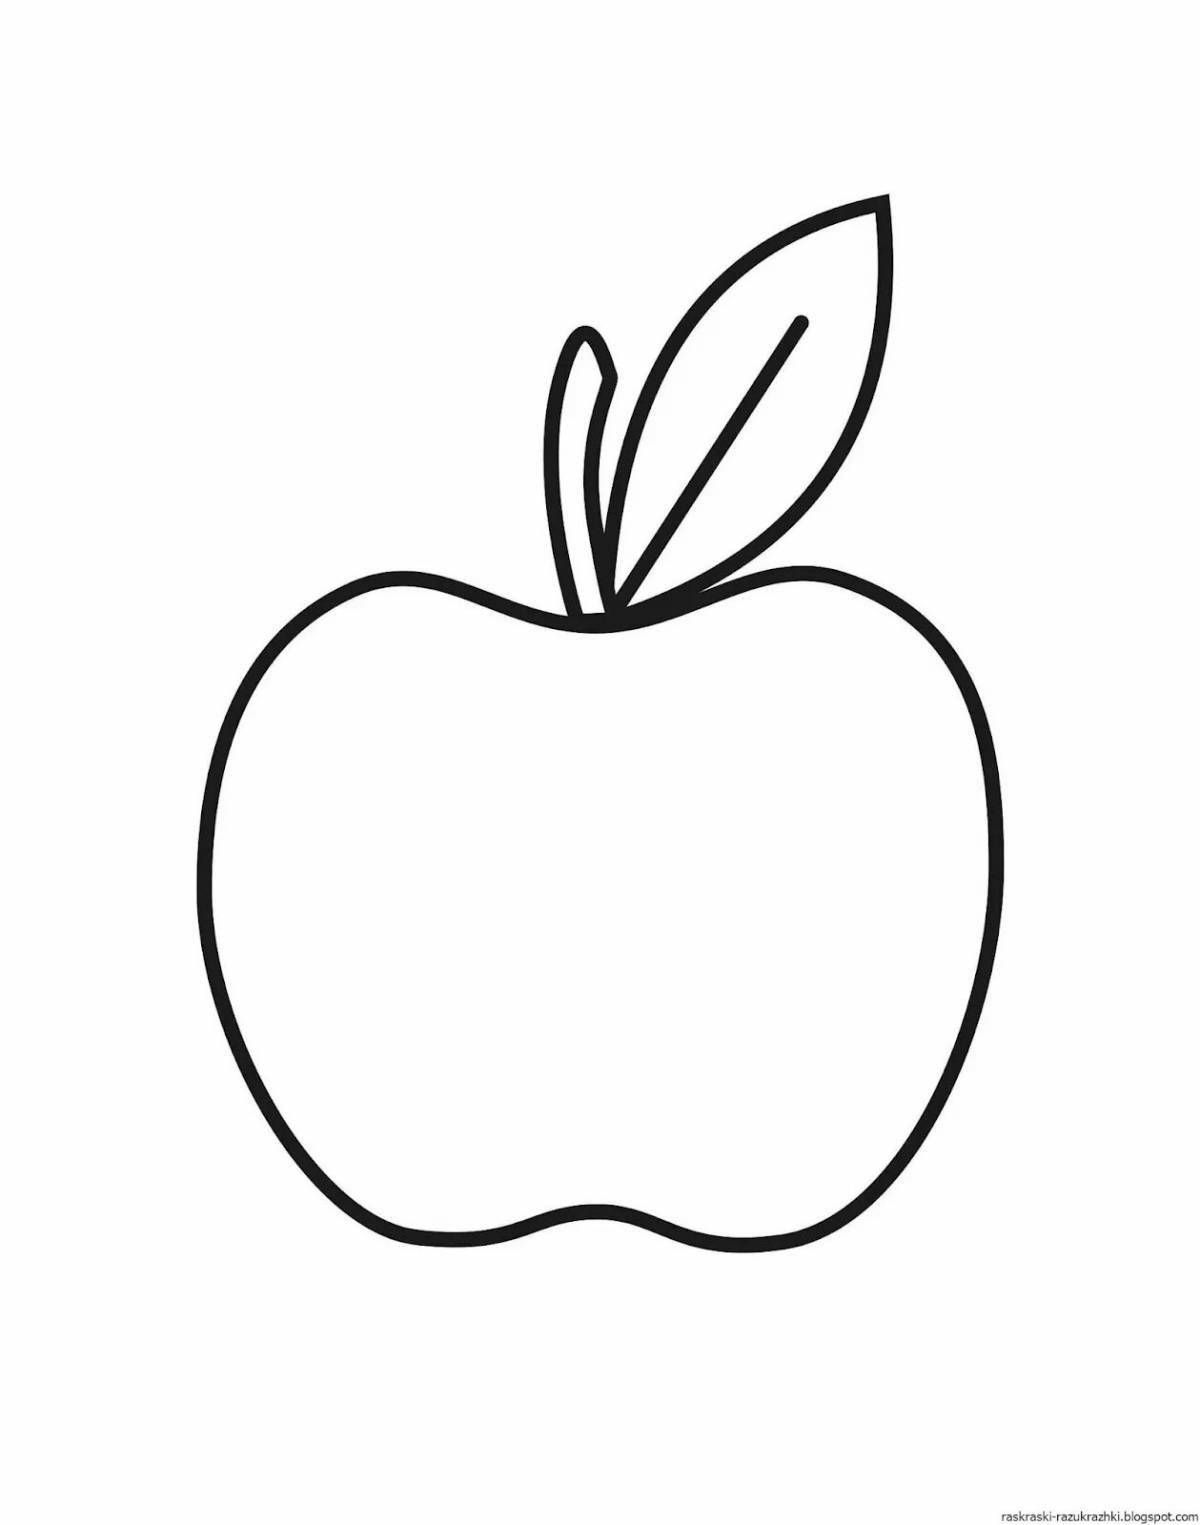 Amazing apple coloring book for kids